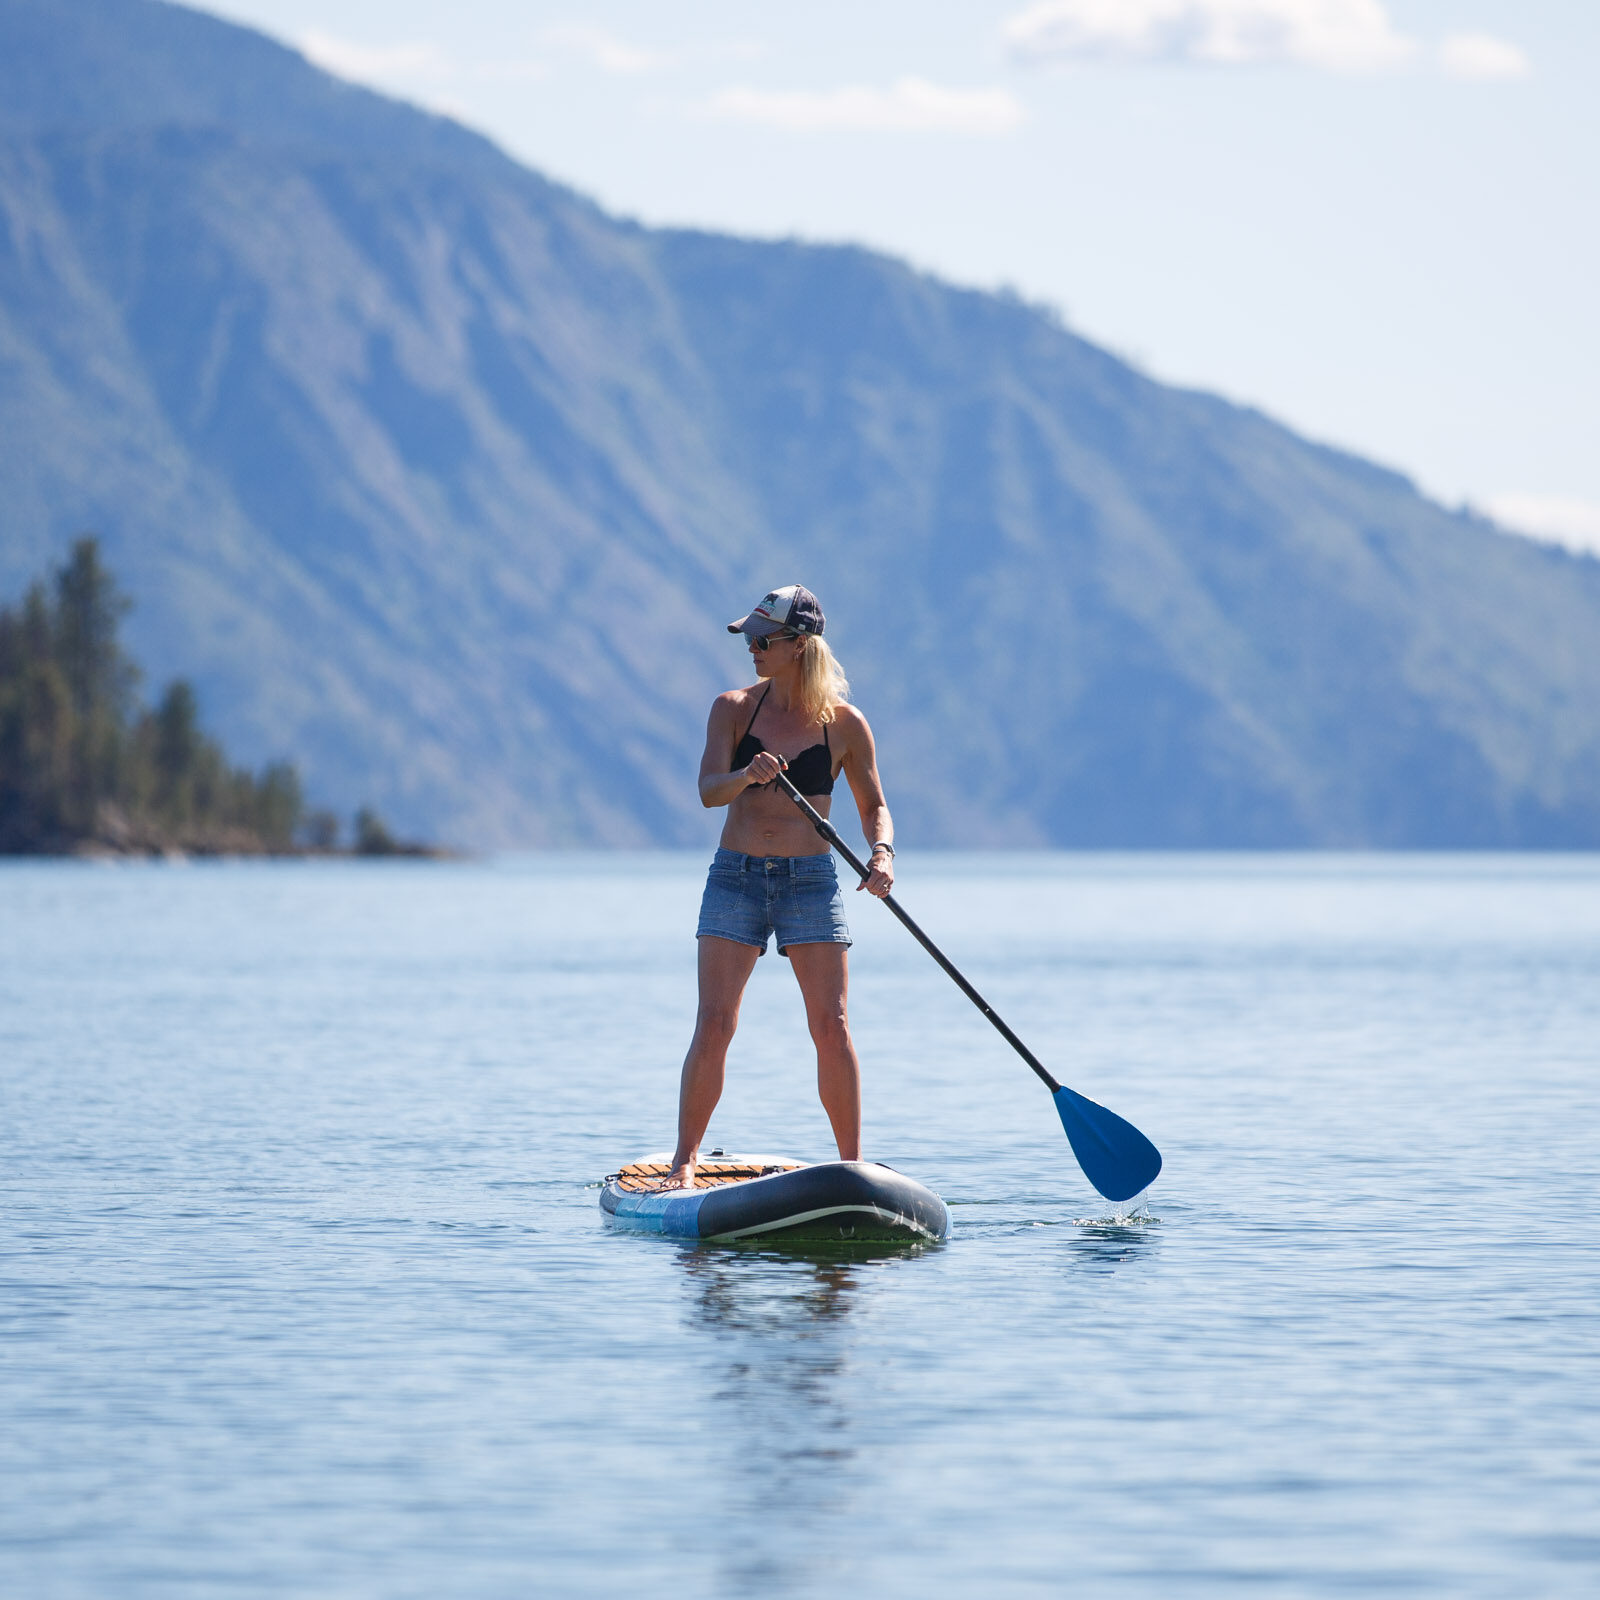 Woman on a Stand Up Paddle Board